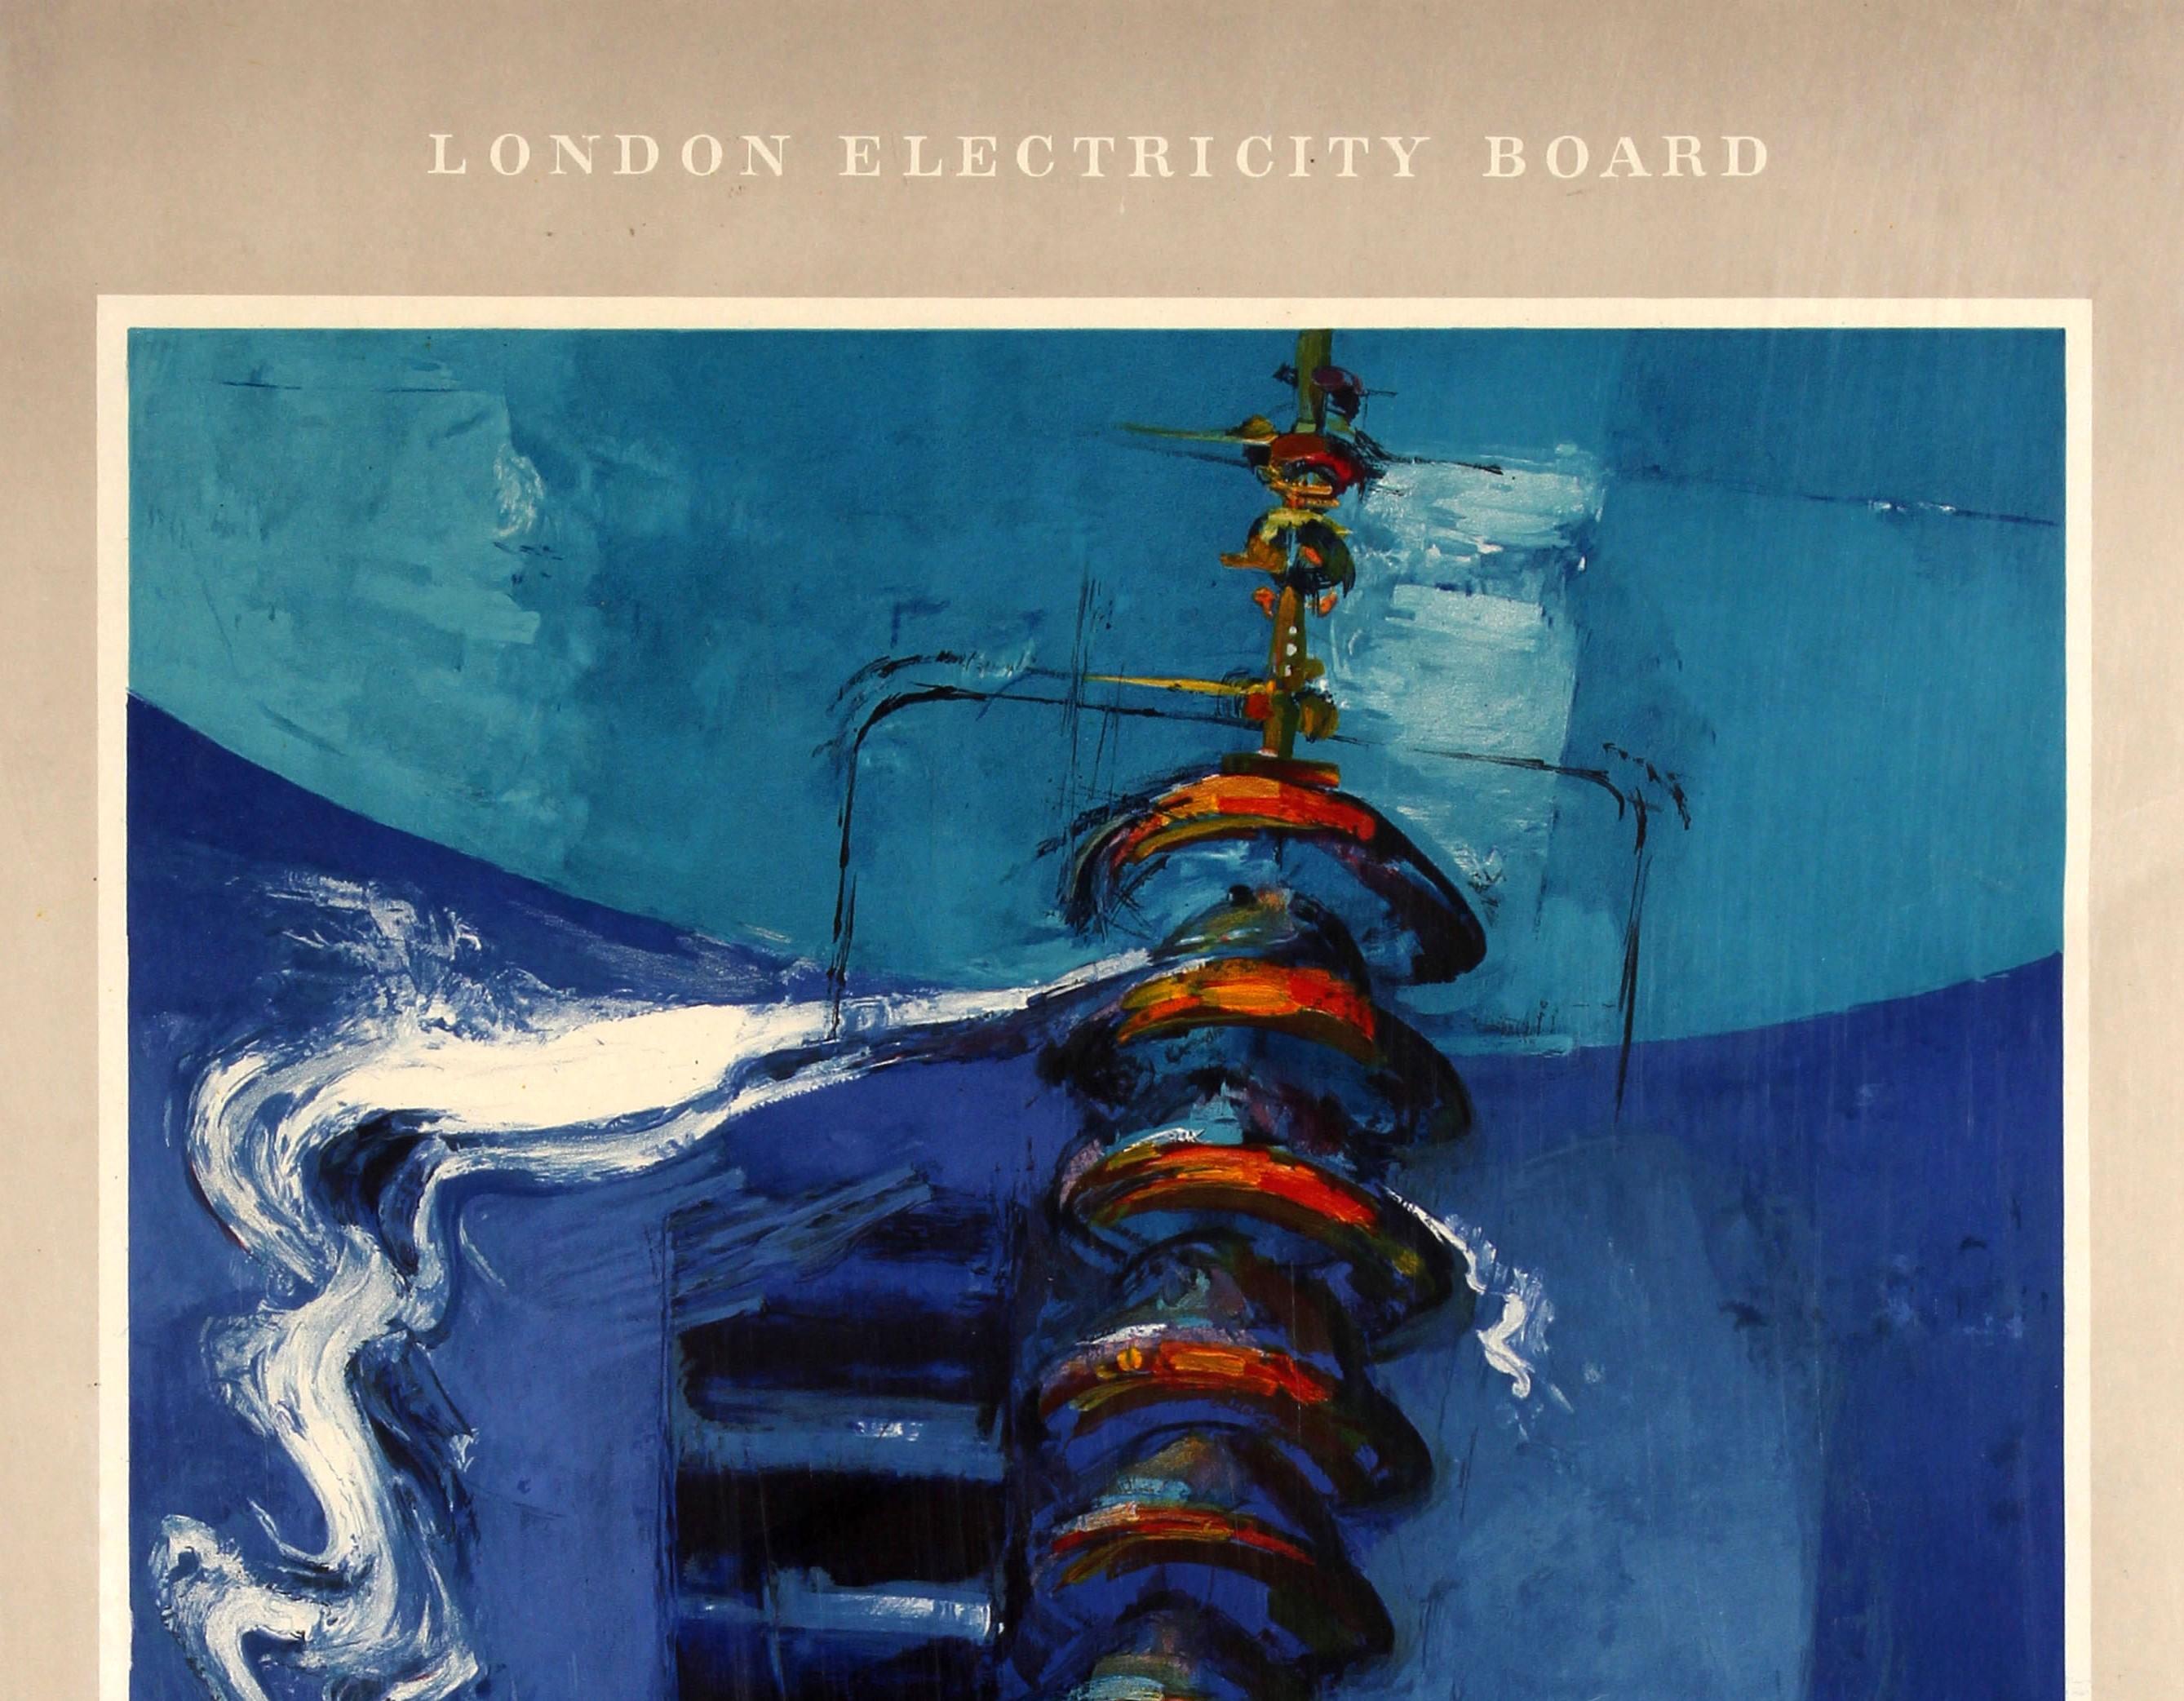 Original vintage London Electricity Board poster entitled The Power of London - Electricity featuring a bold and colourful artwork From a painting by Donald Hamilton Fraser (1929-2009) showing an electrical insulator in front of a white and blue